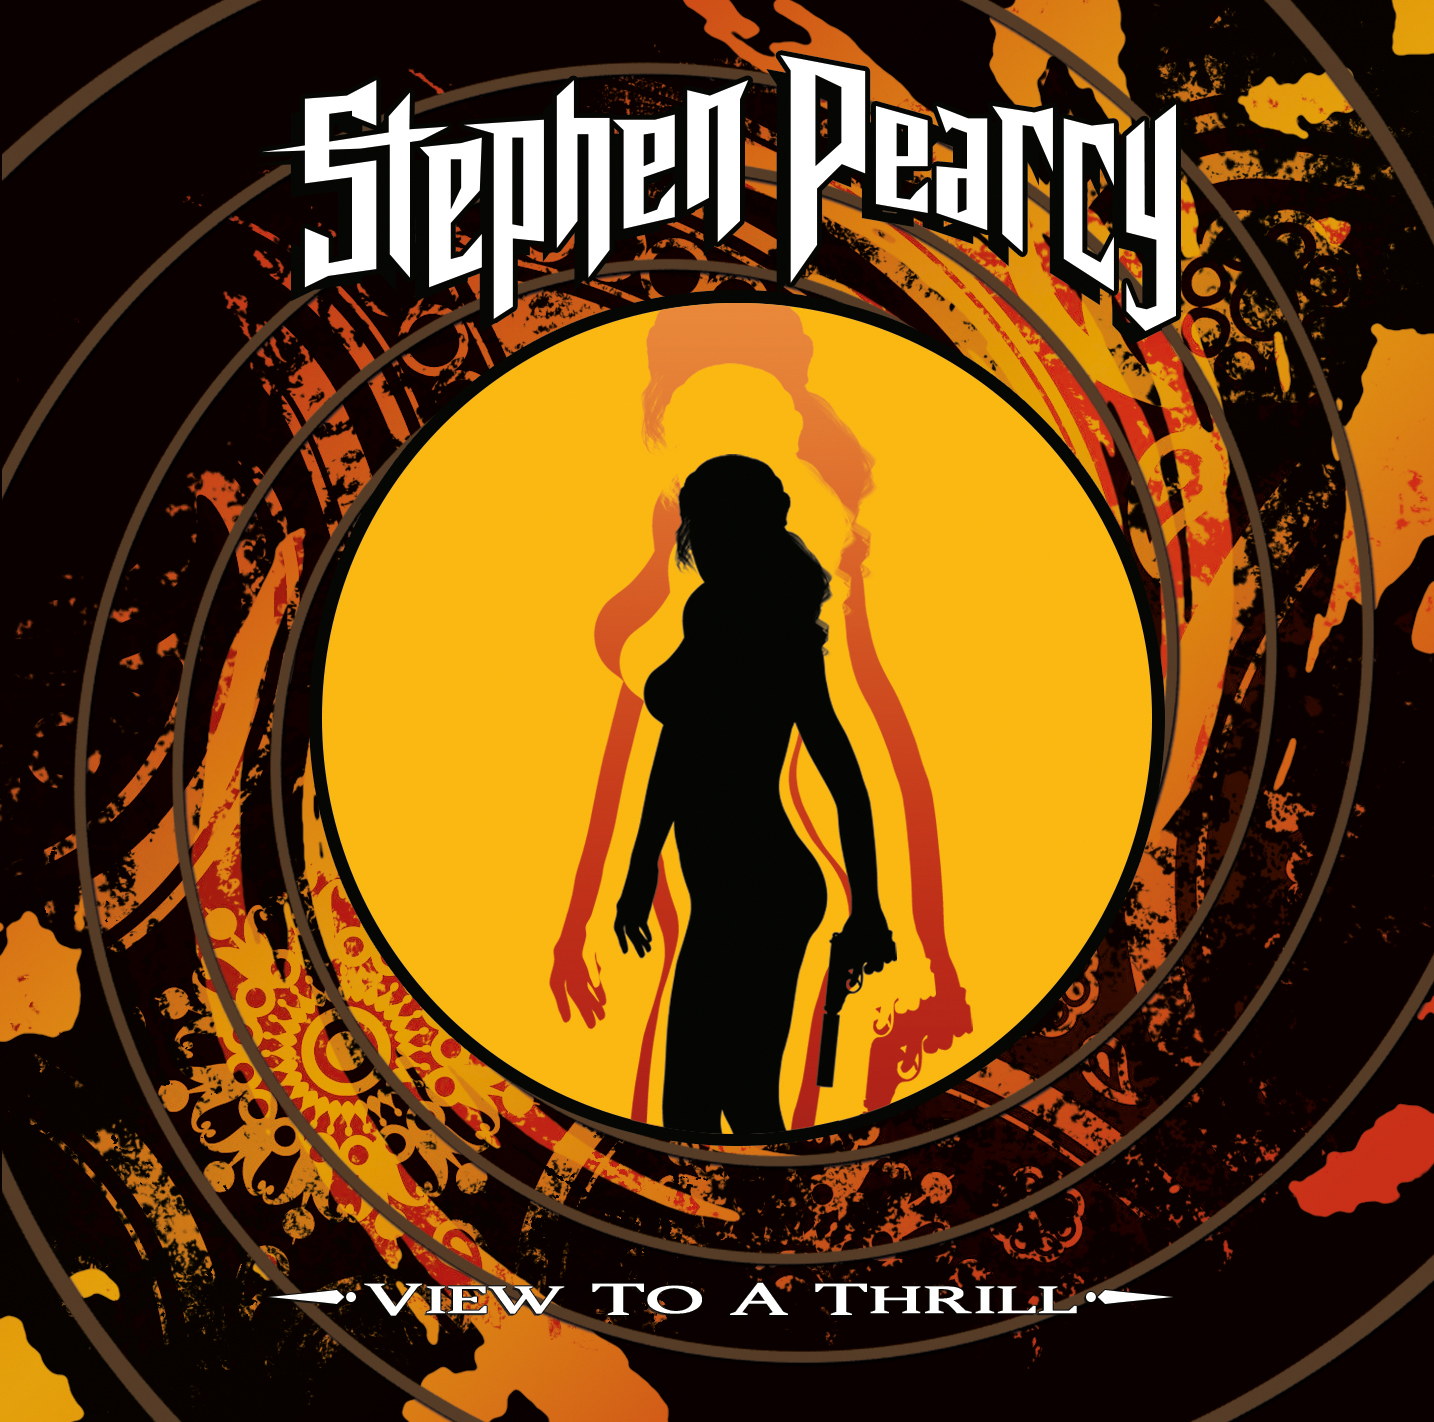 Stephen Pearcy - View To A Thrill - CD